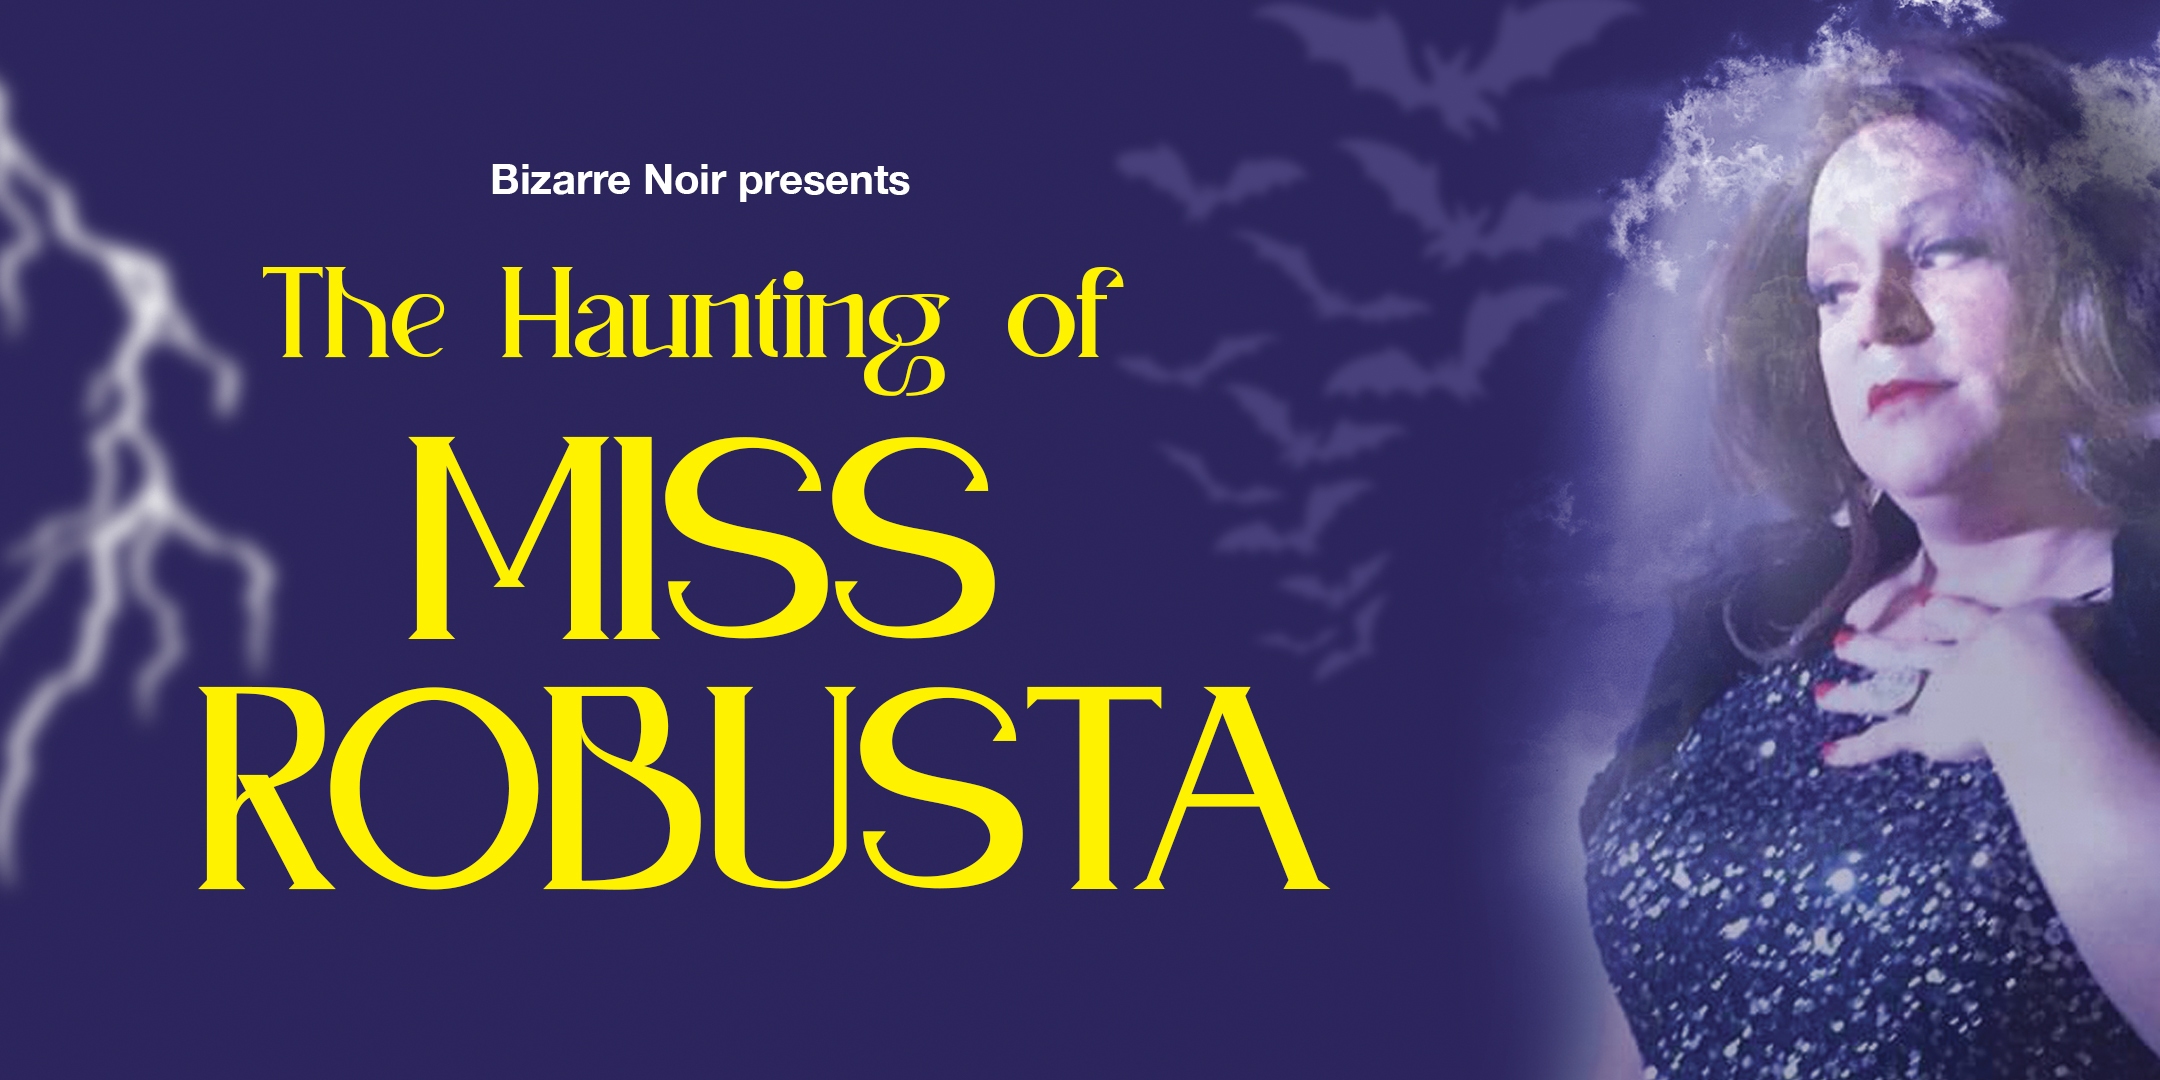 The Haunting of Miss Robusta